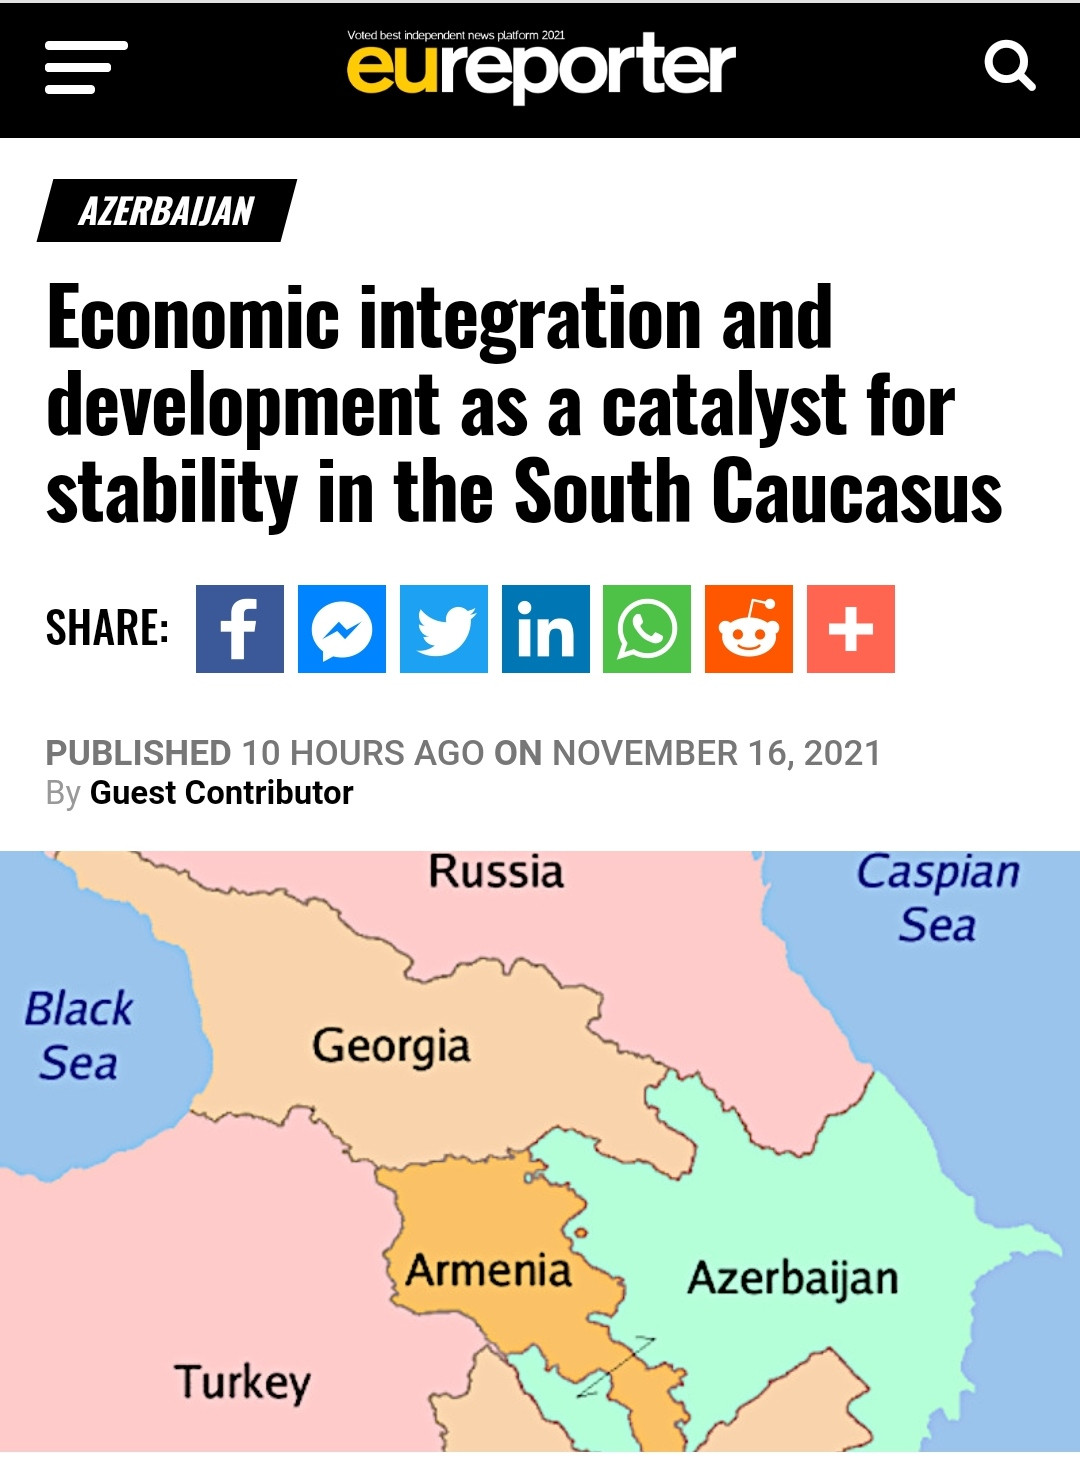 Economic integration and development as a catalyst for stability in the South Caucasus